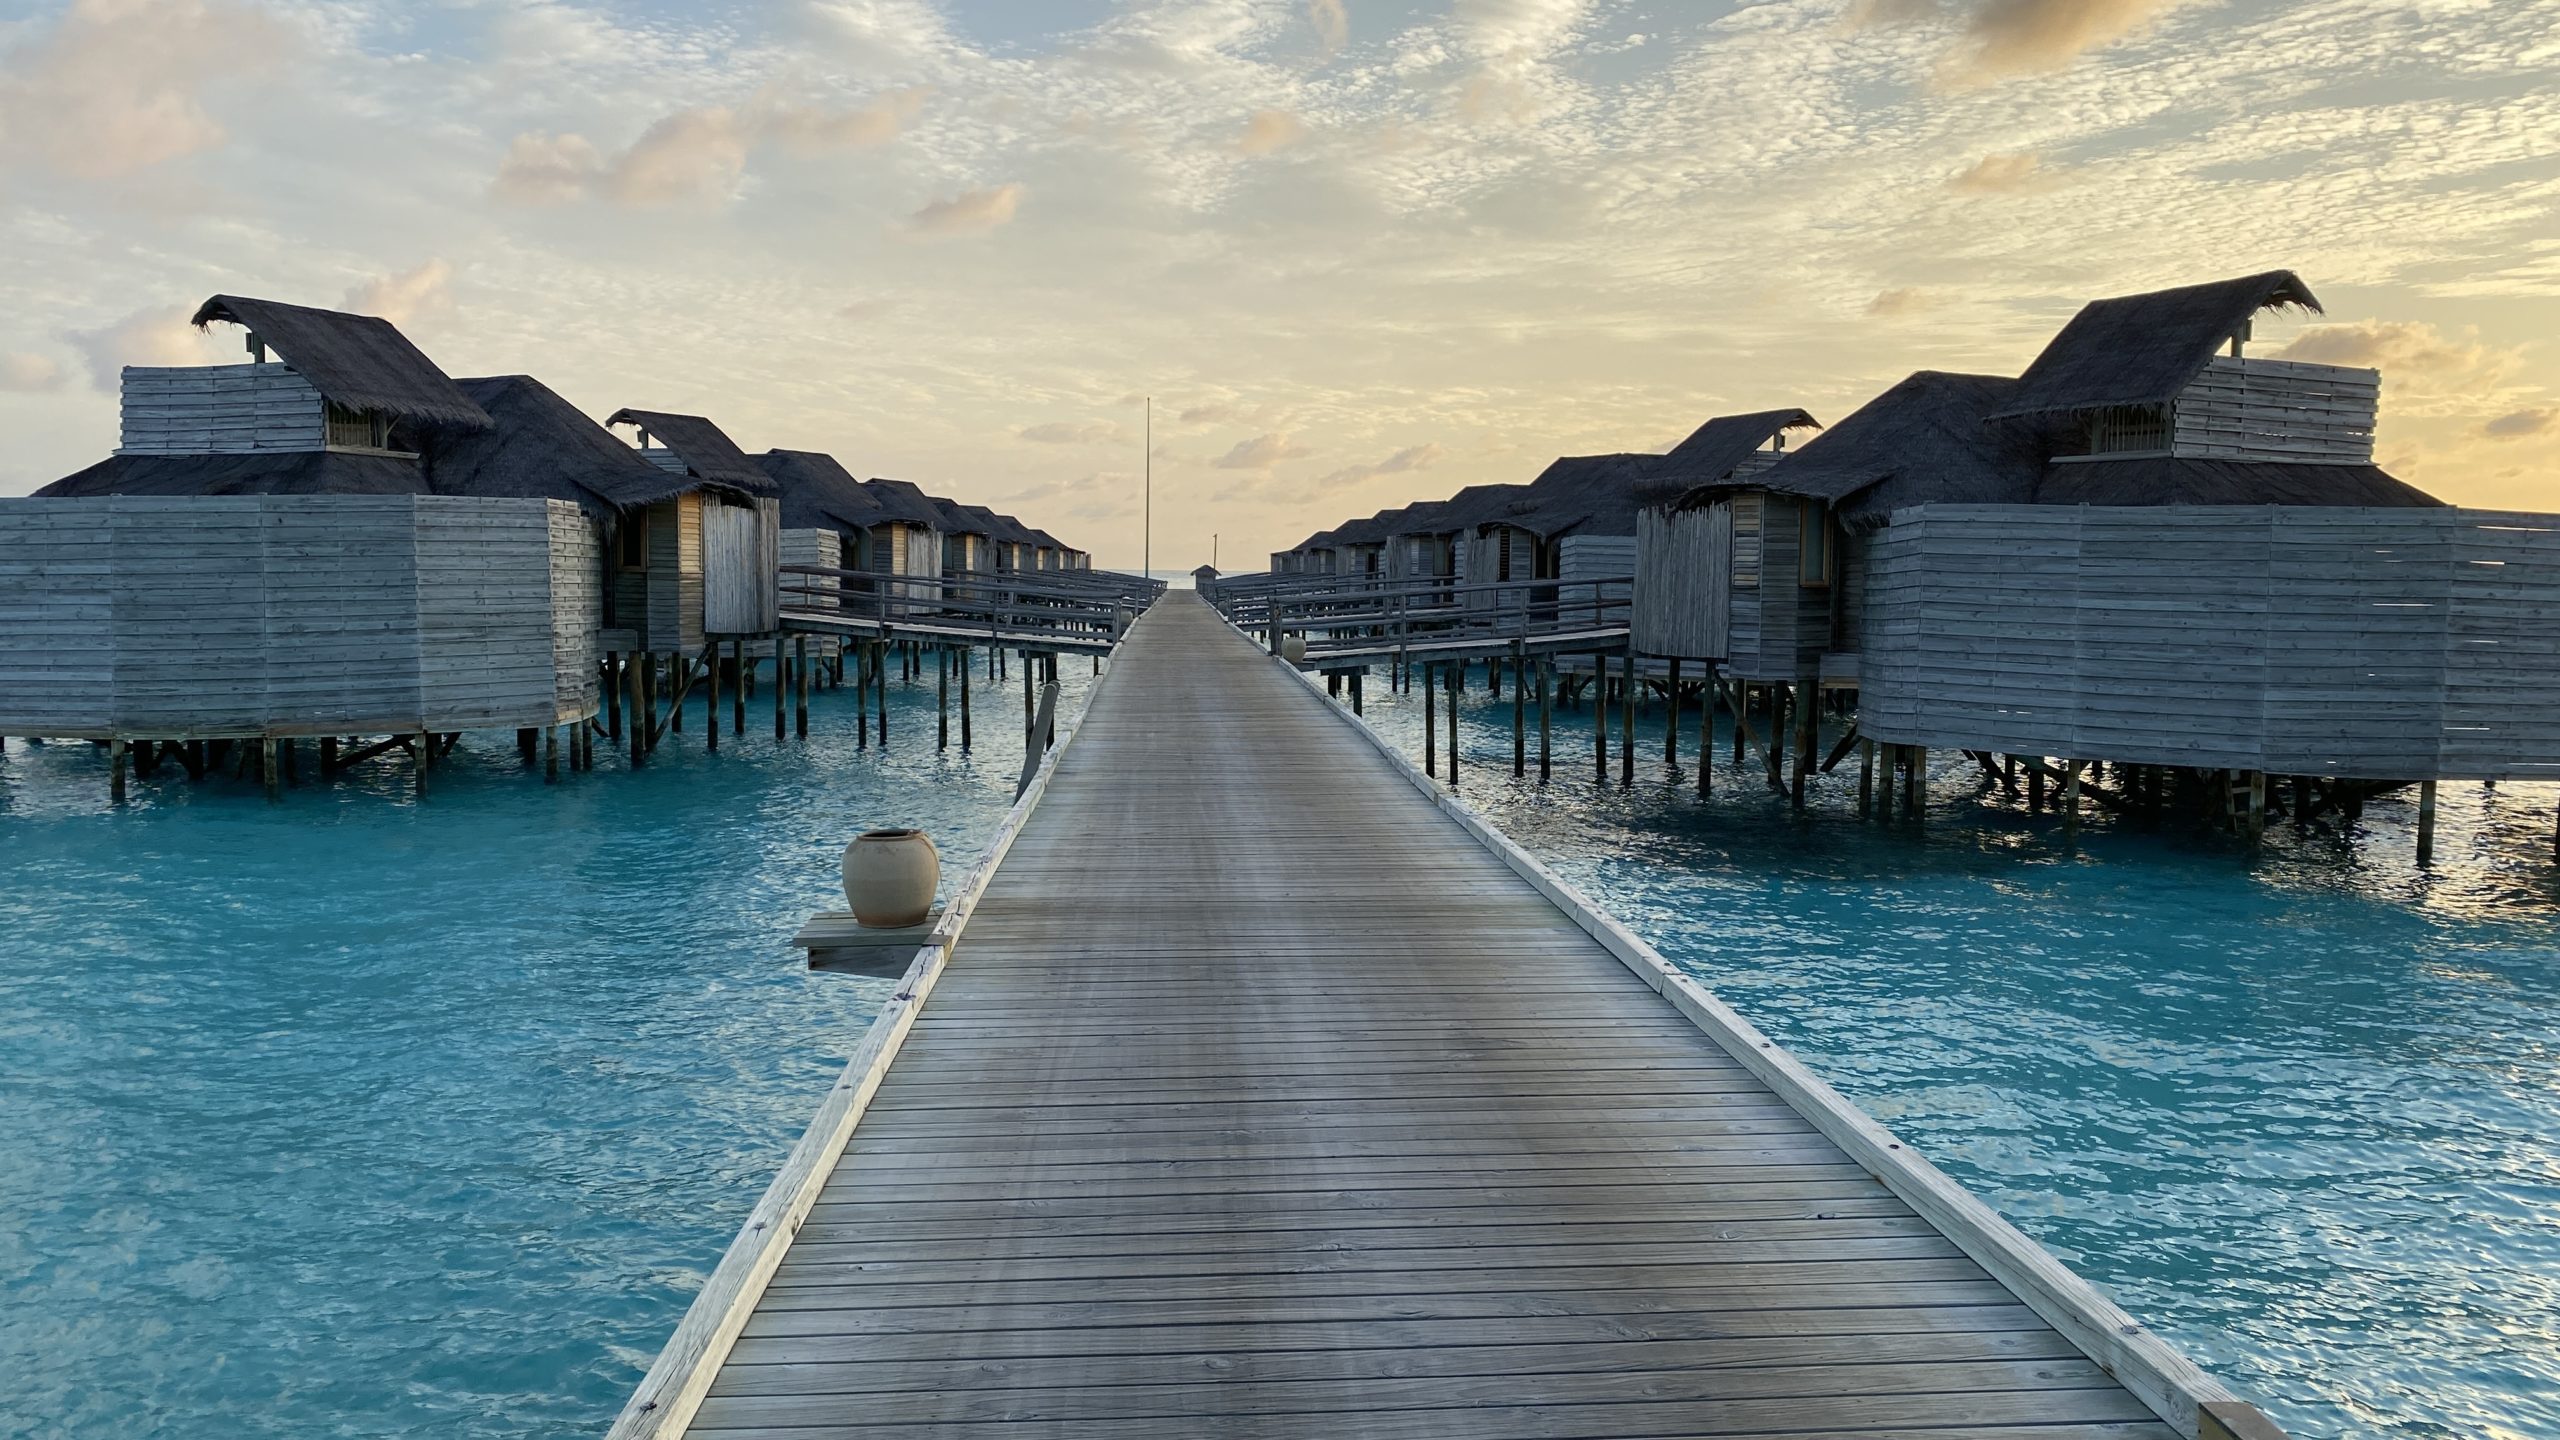 a long wooden walkway leading to a row of huts on stilts